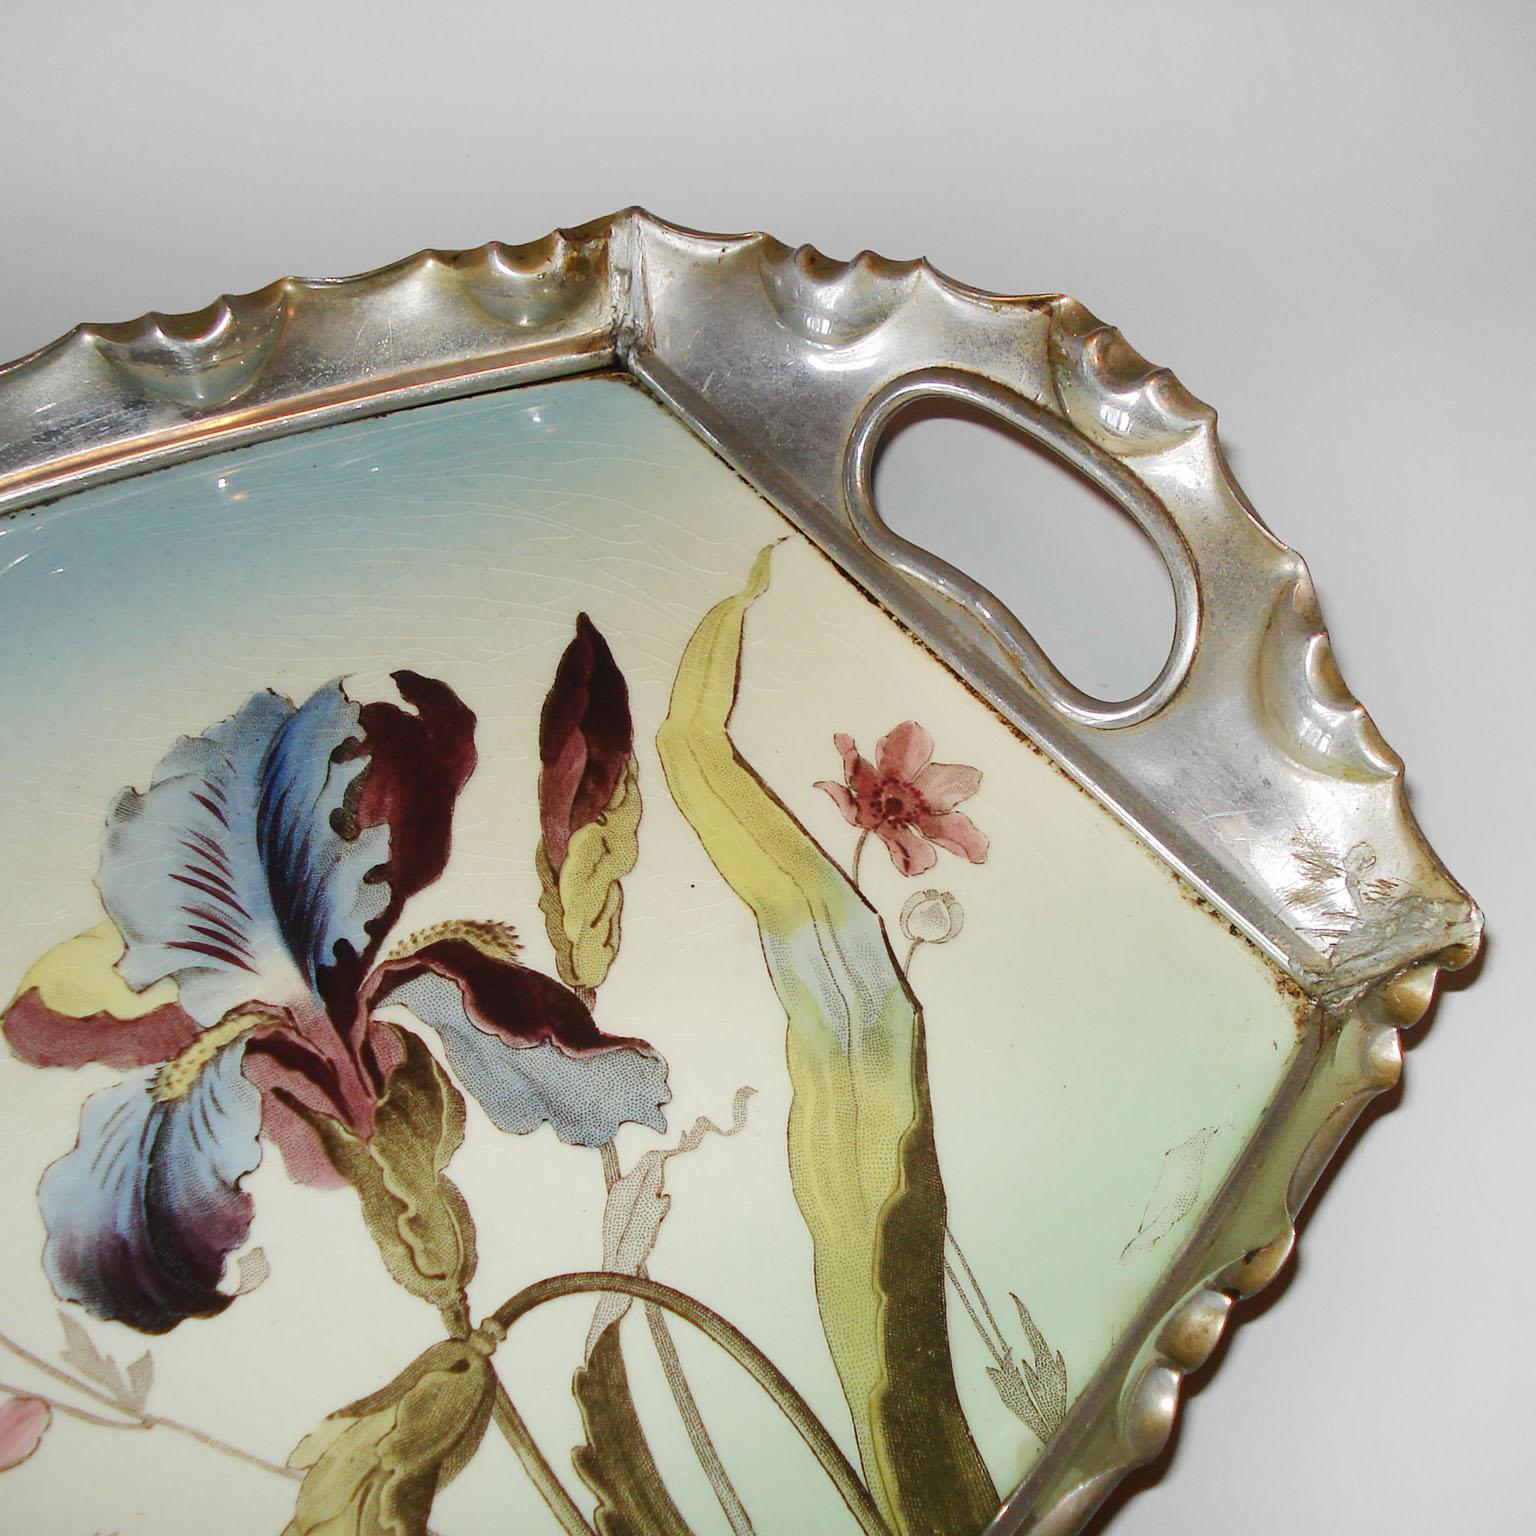 Art Nouveau Porcelain and Pewter Tray by Max Dannhorn, Villeroy & Boch 1